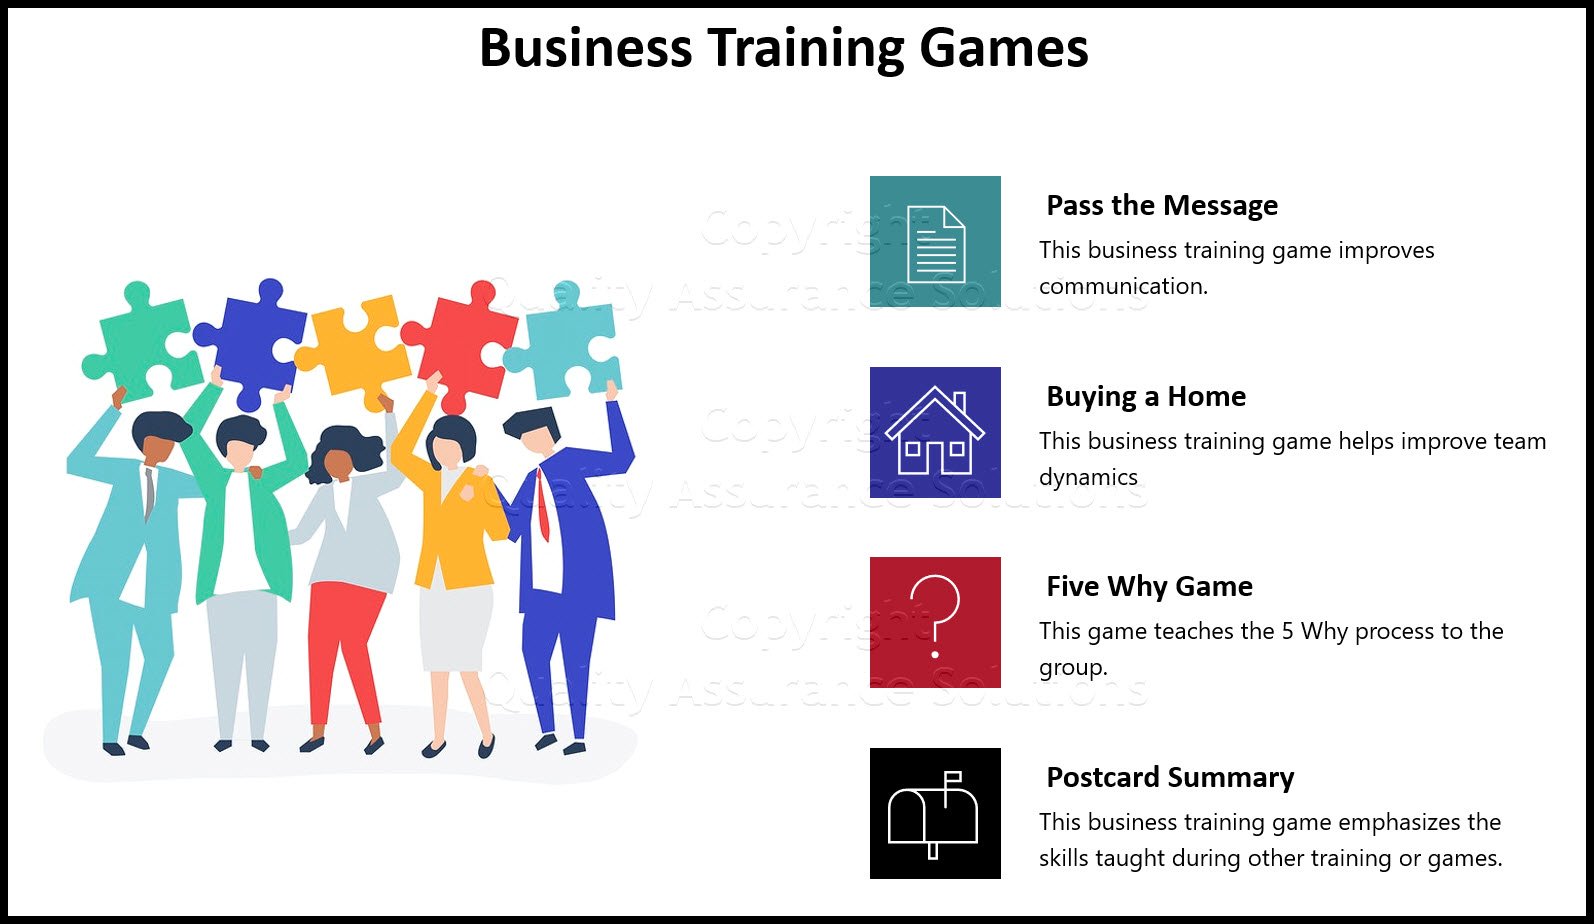 Free business training game that you can implement as part of your training program. These games focus on team processes, communication, and root causes.